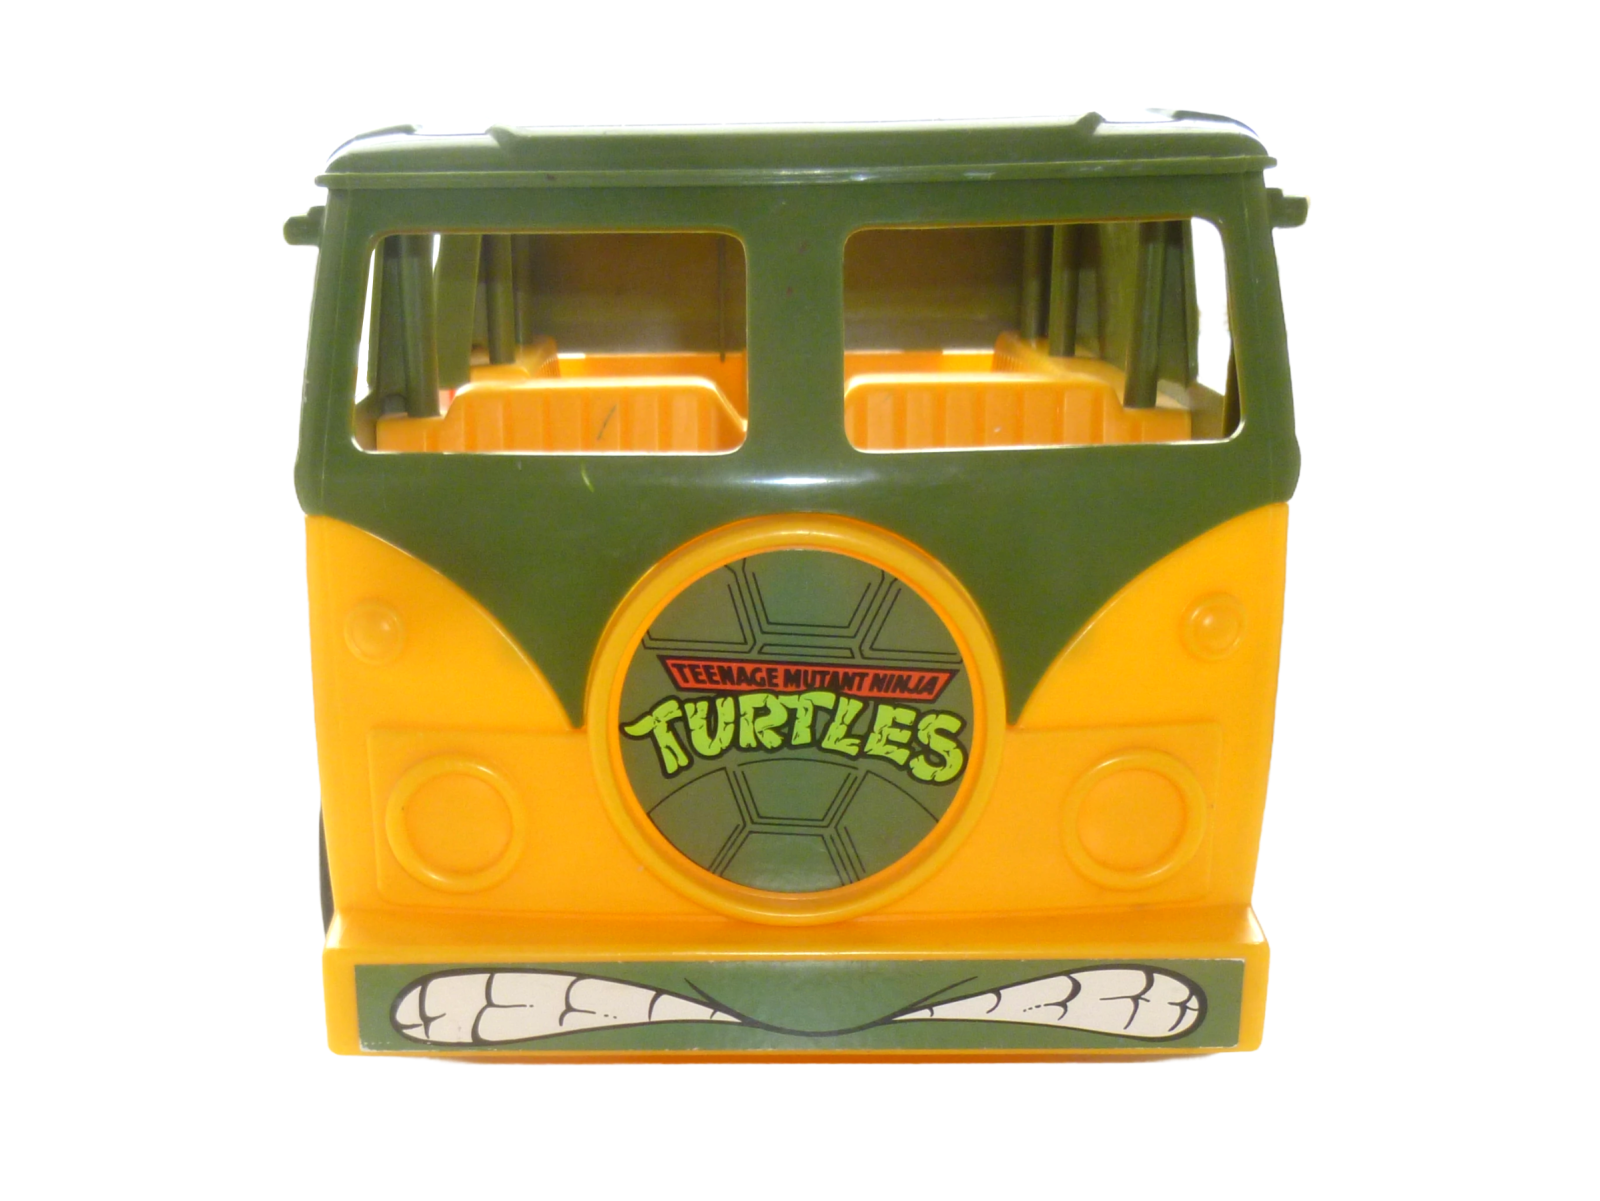 Turtle Party Wagon - Without roof 1988 Mirage Studios / Playmates Toys